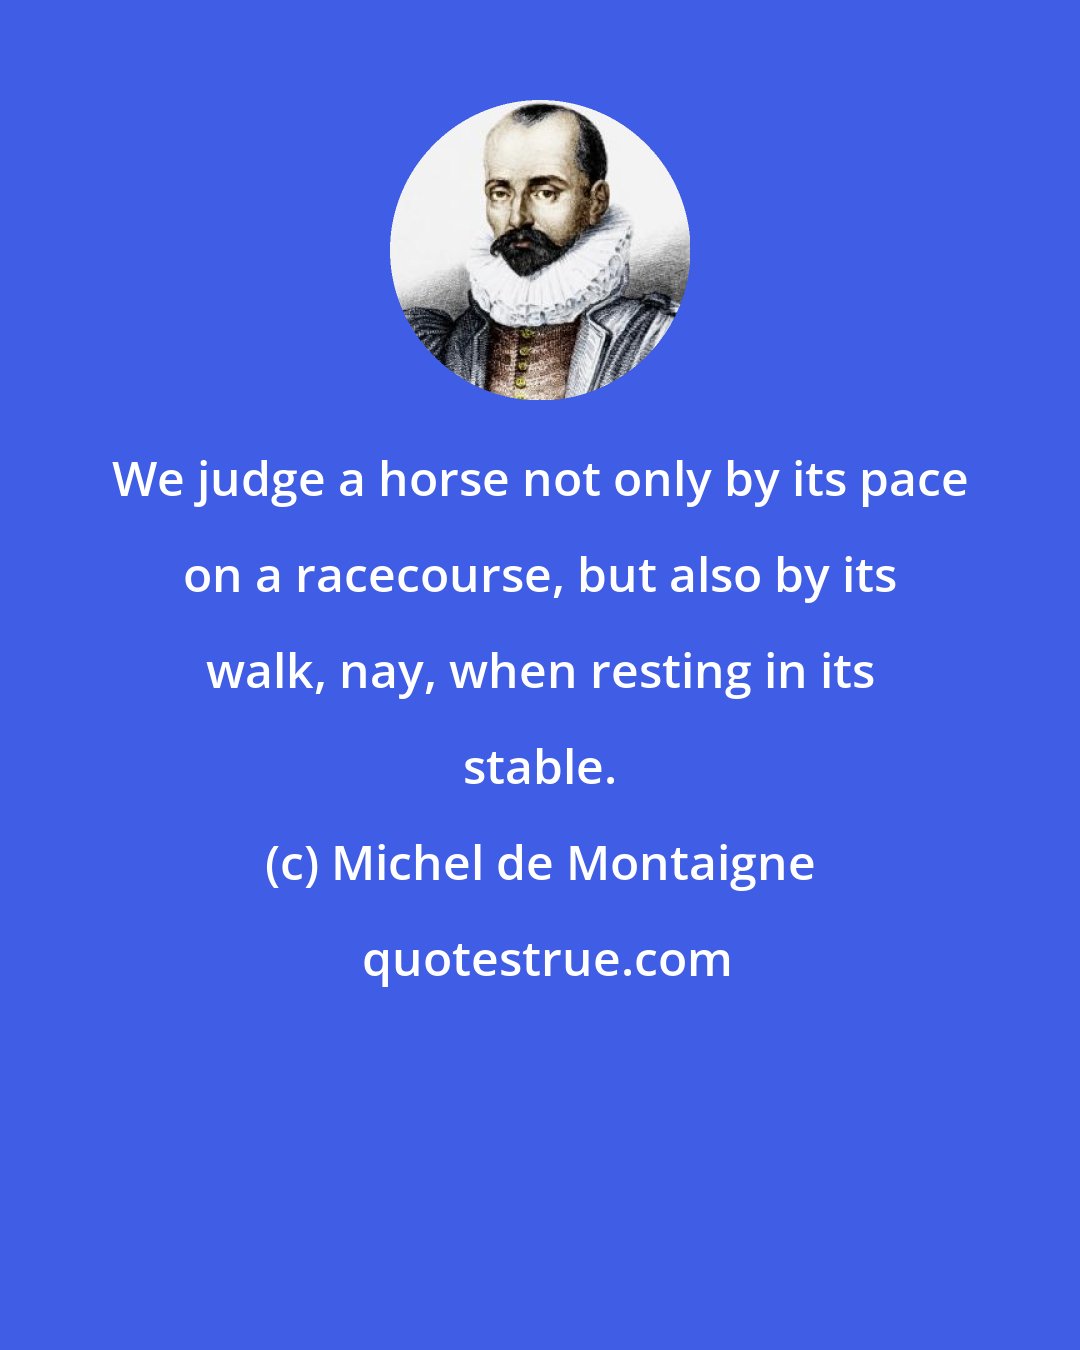 Michel de Montaigne: We judge a horse not only by its pace on a racecourse, but also by its walk, nay, when resting in its stable.